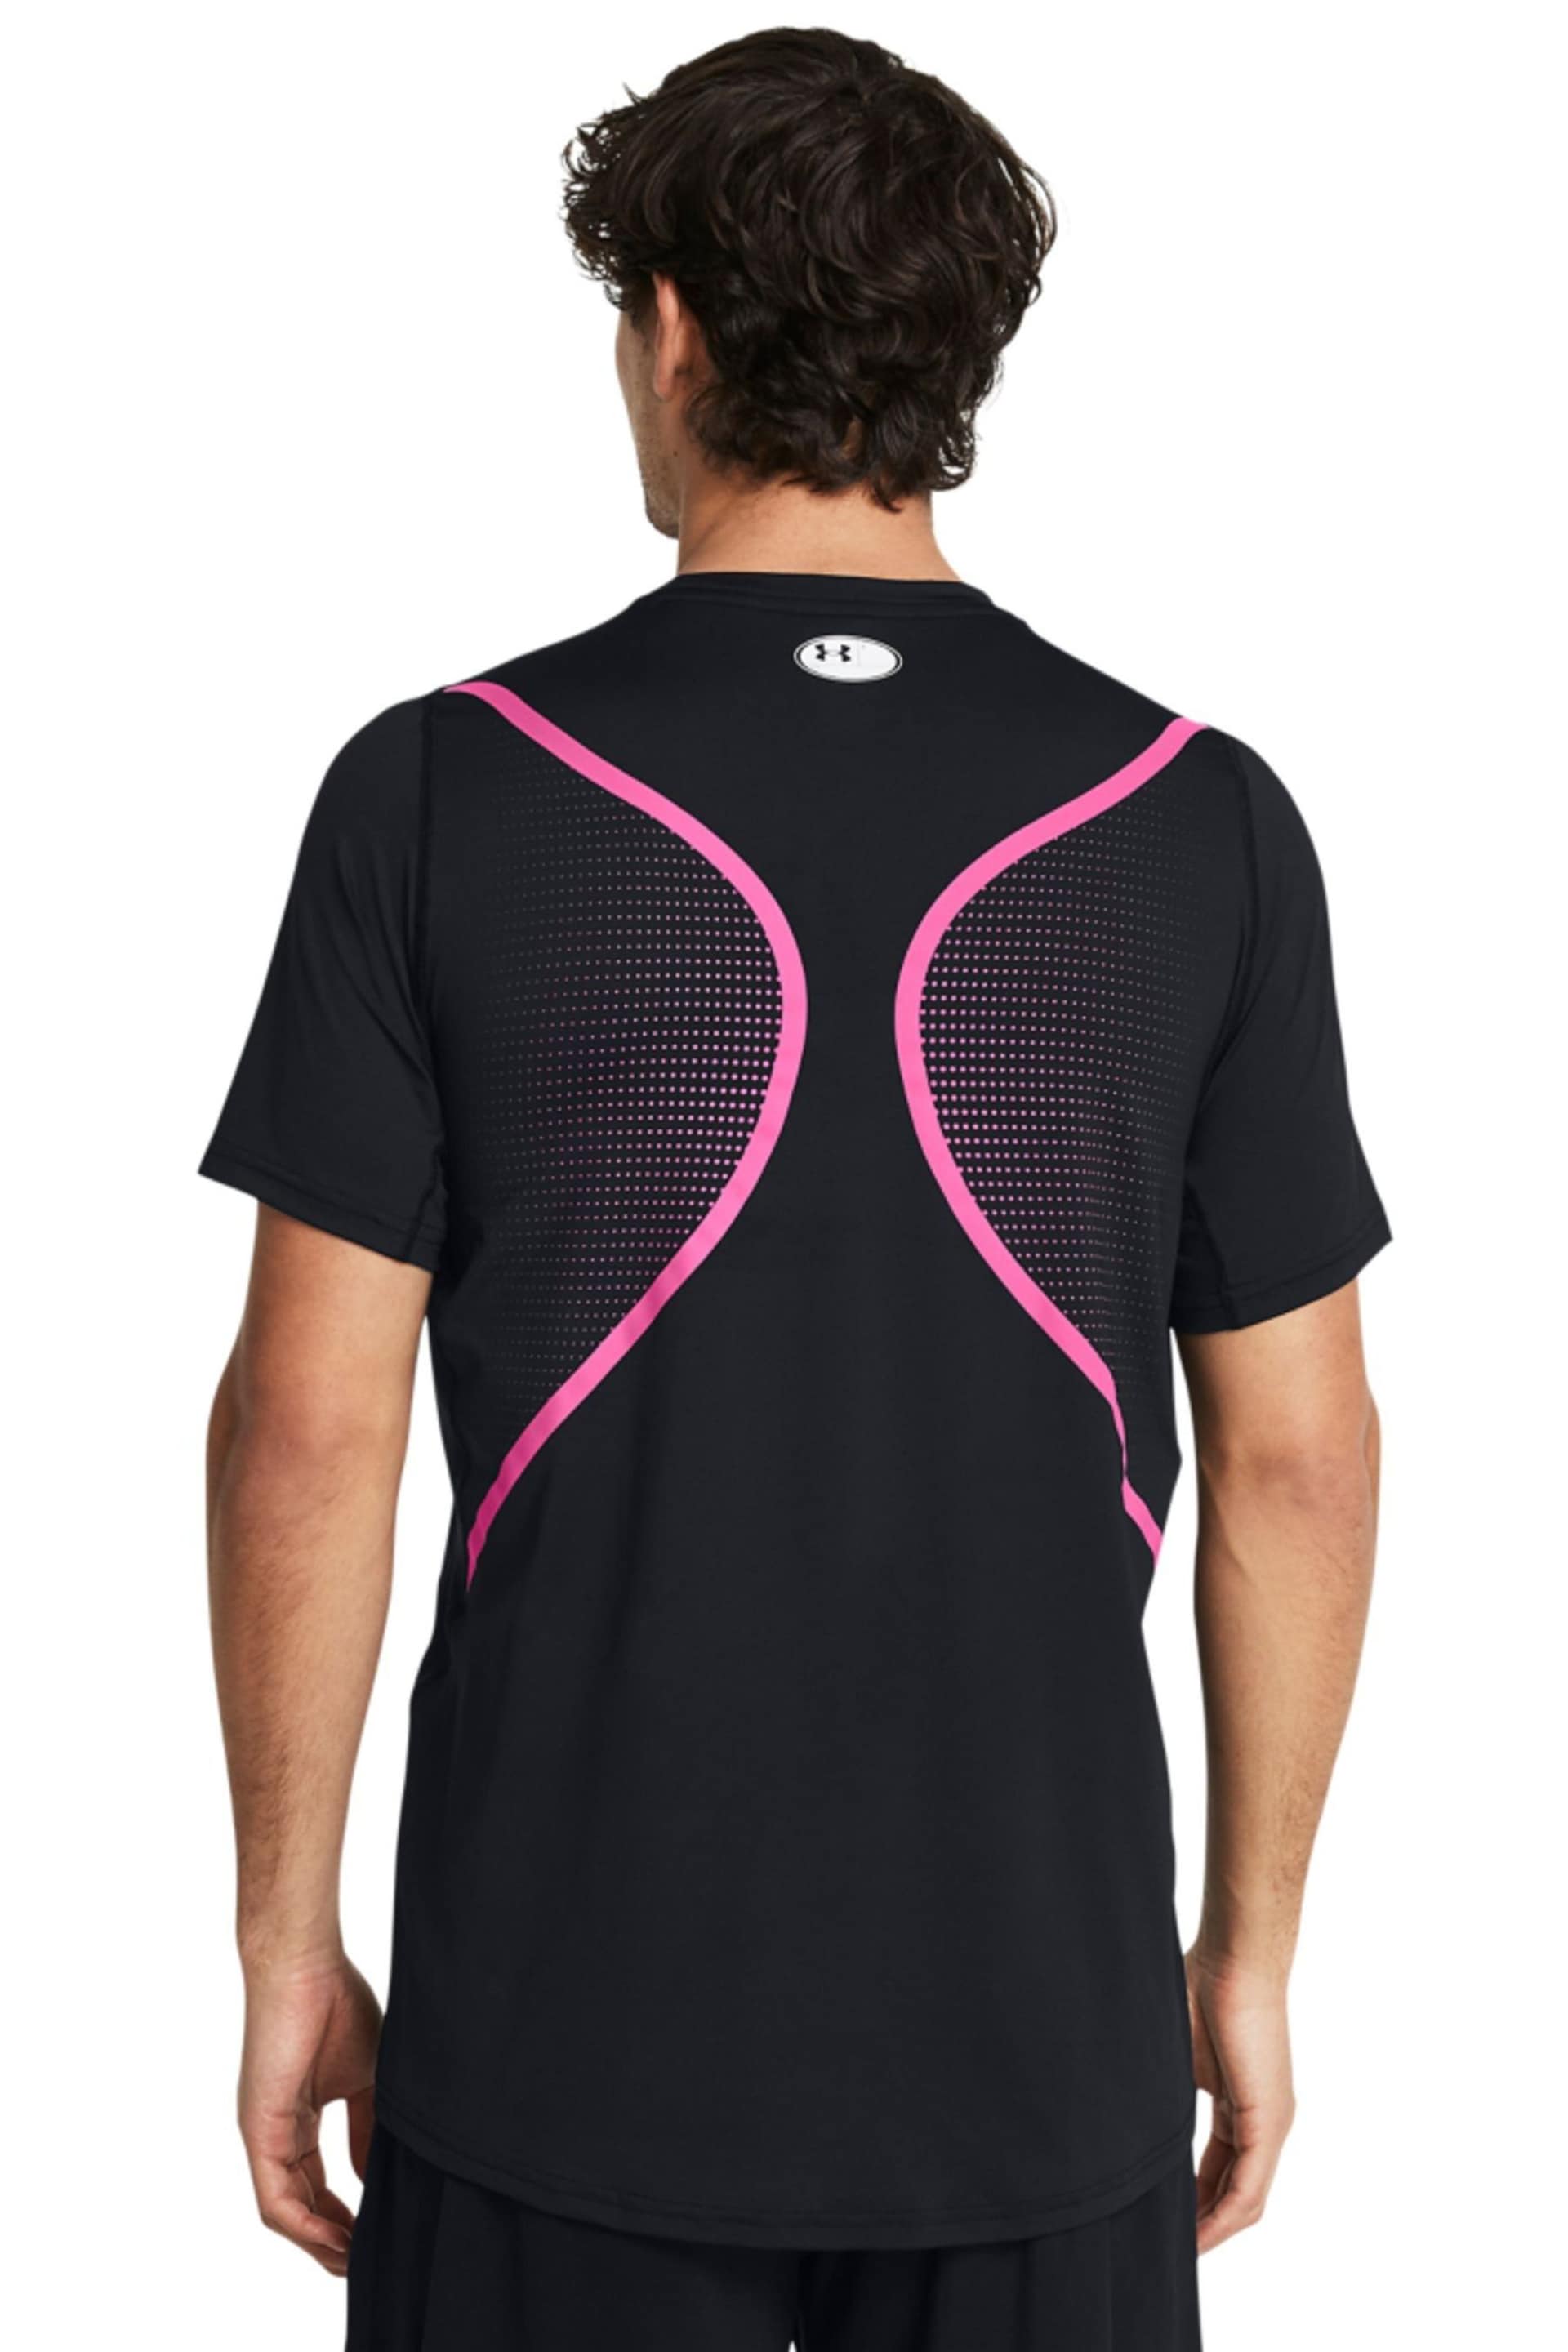 Under Armour Black/Pink HeatGear Fitted Short Sleeve T-Shirt - Image 2 of 2